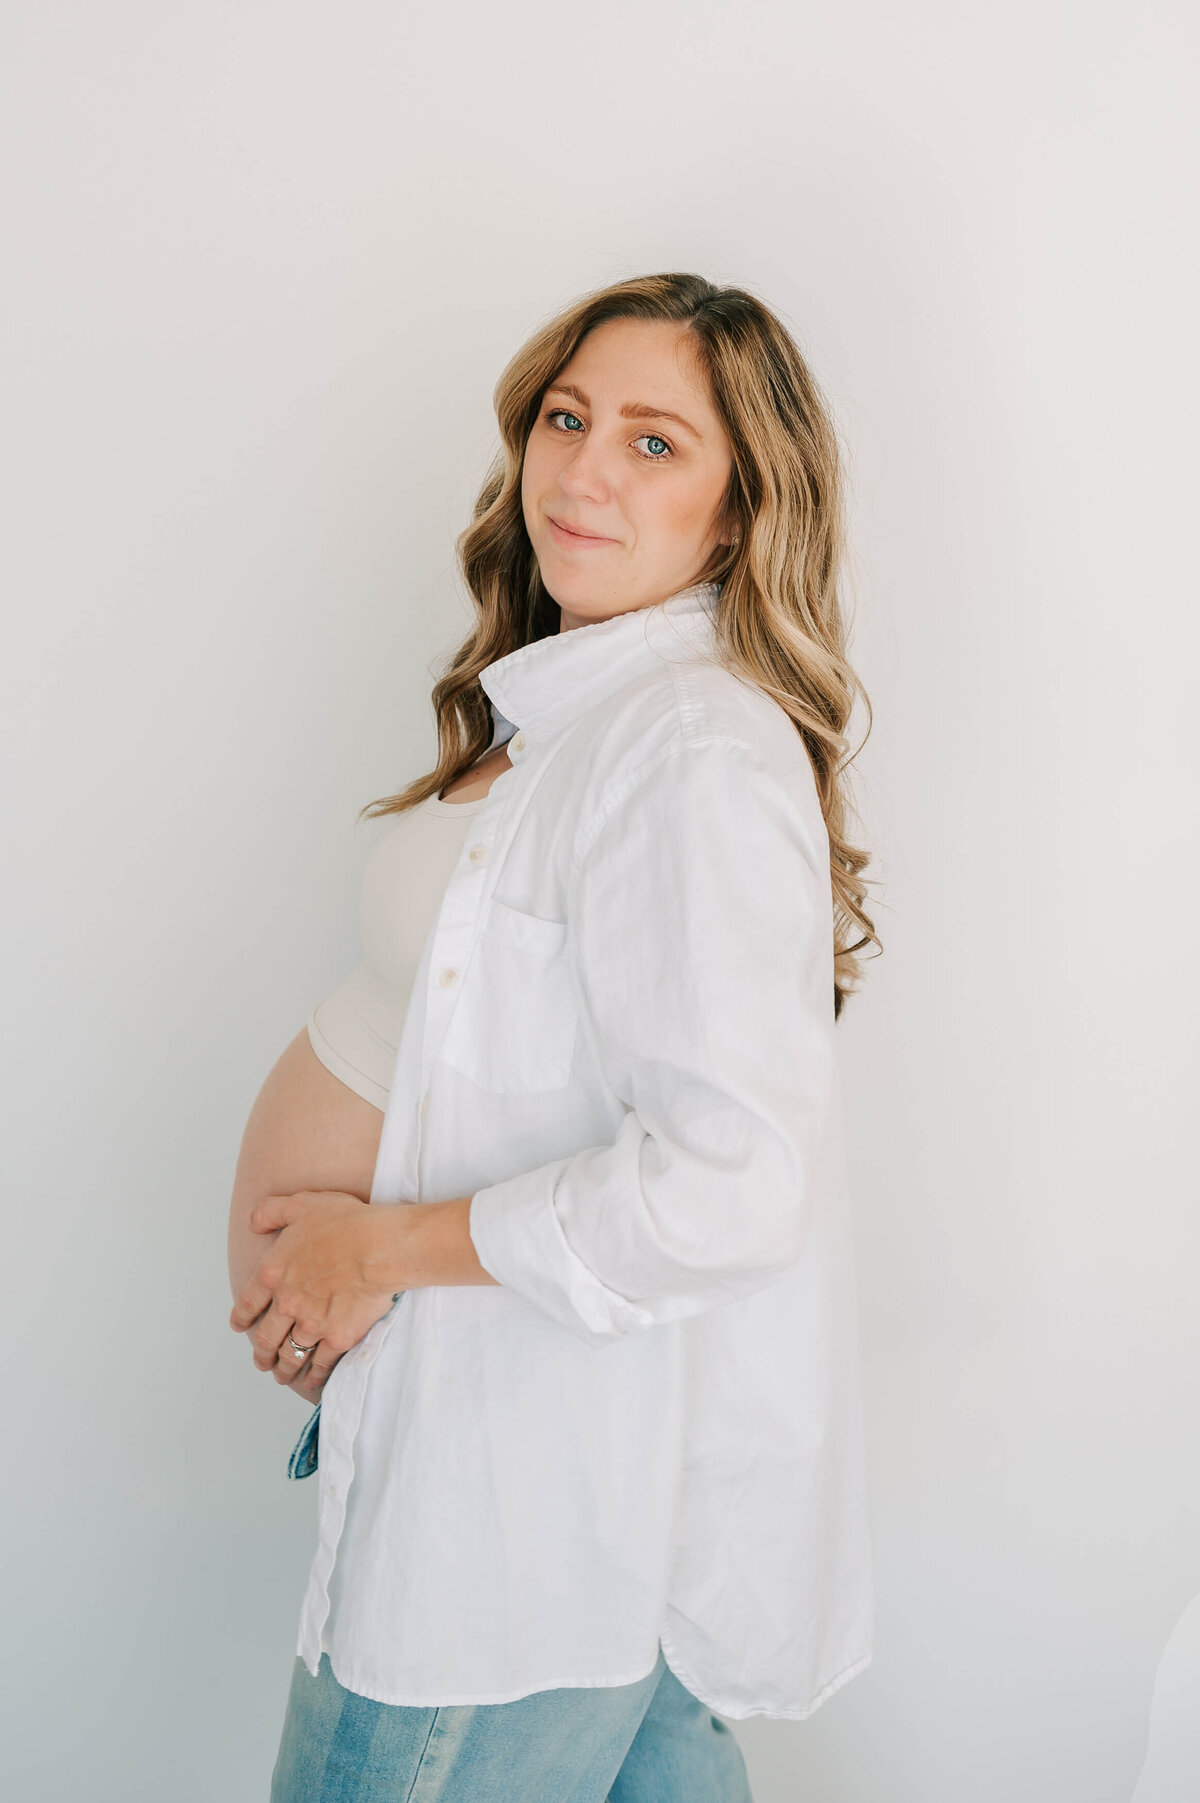 pregnant mom in jeans holding bump during Branson MO maternity photography session